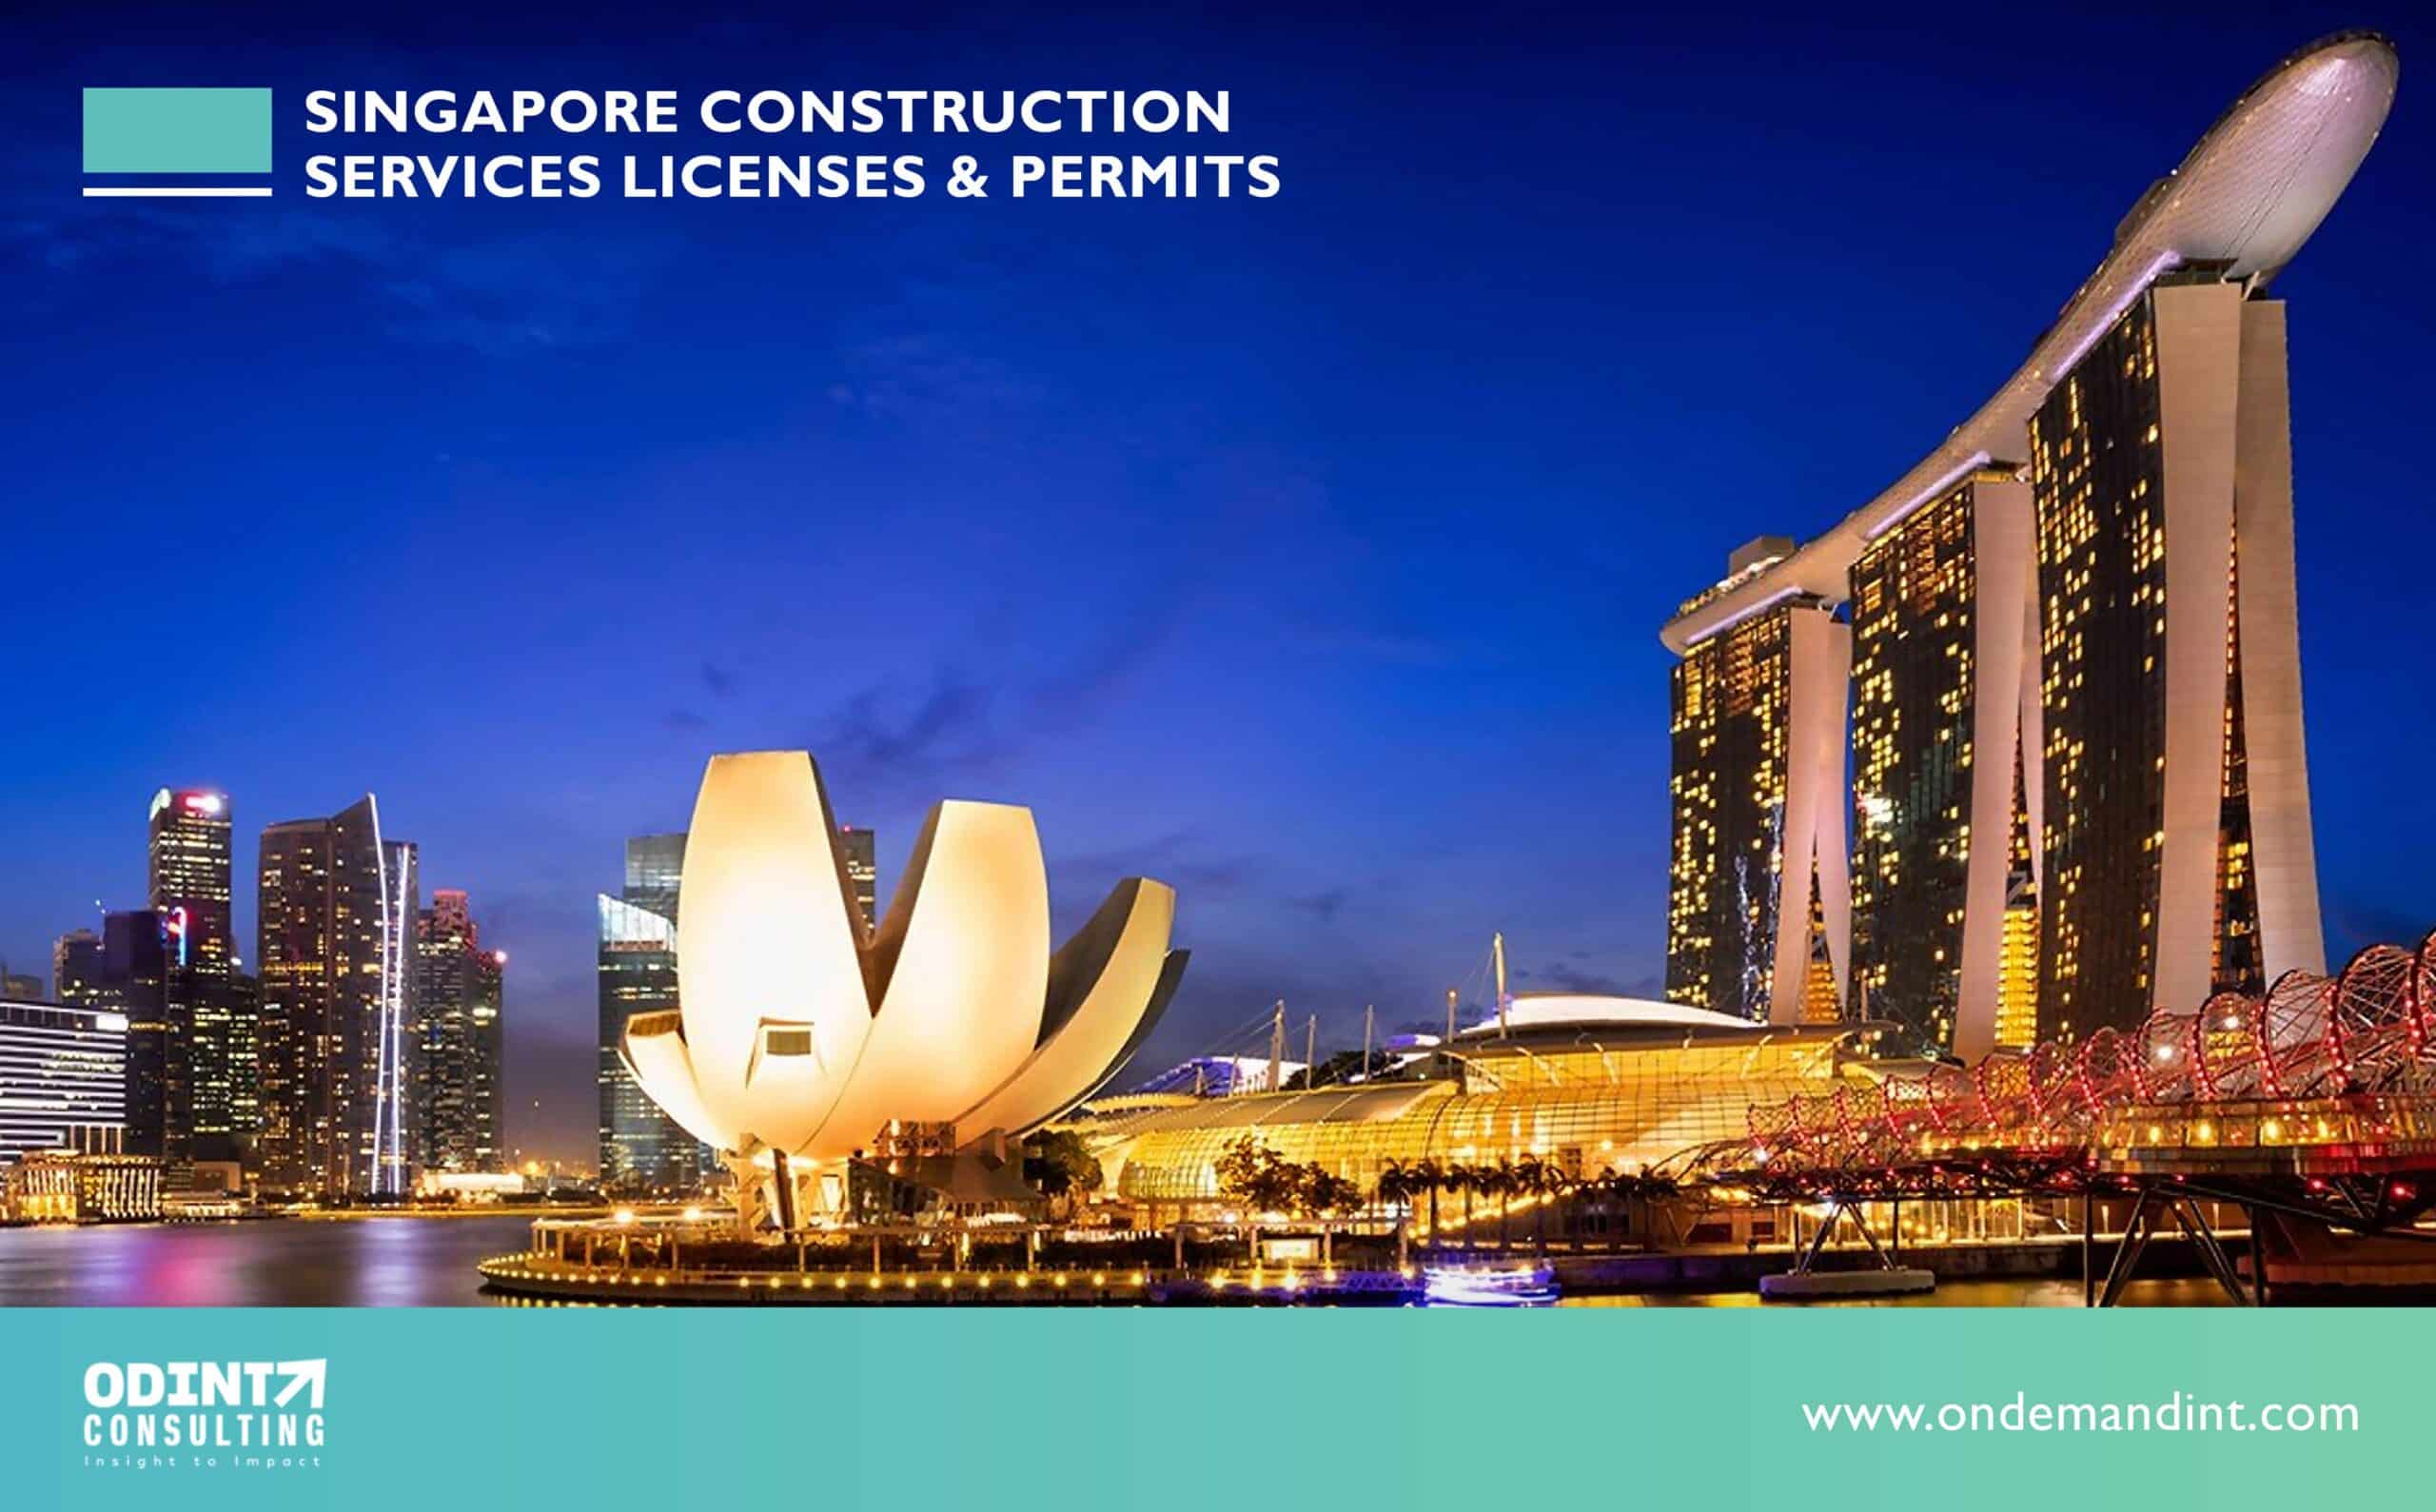 3 Types of Singapore Construction Services Licenses and Permits: Various Classes & Fees